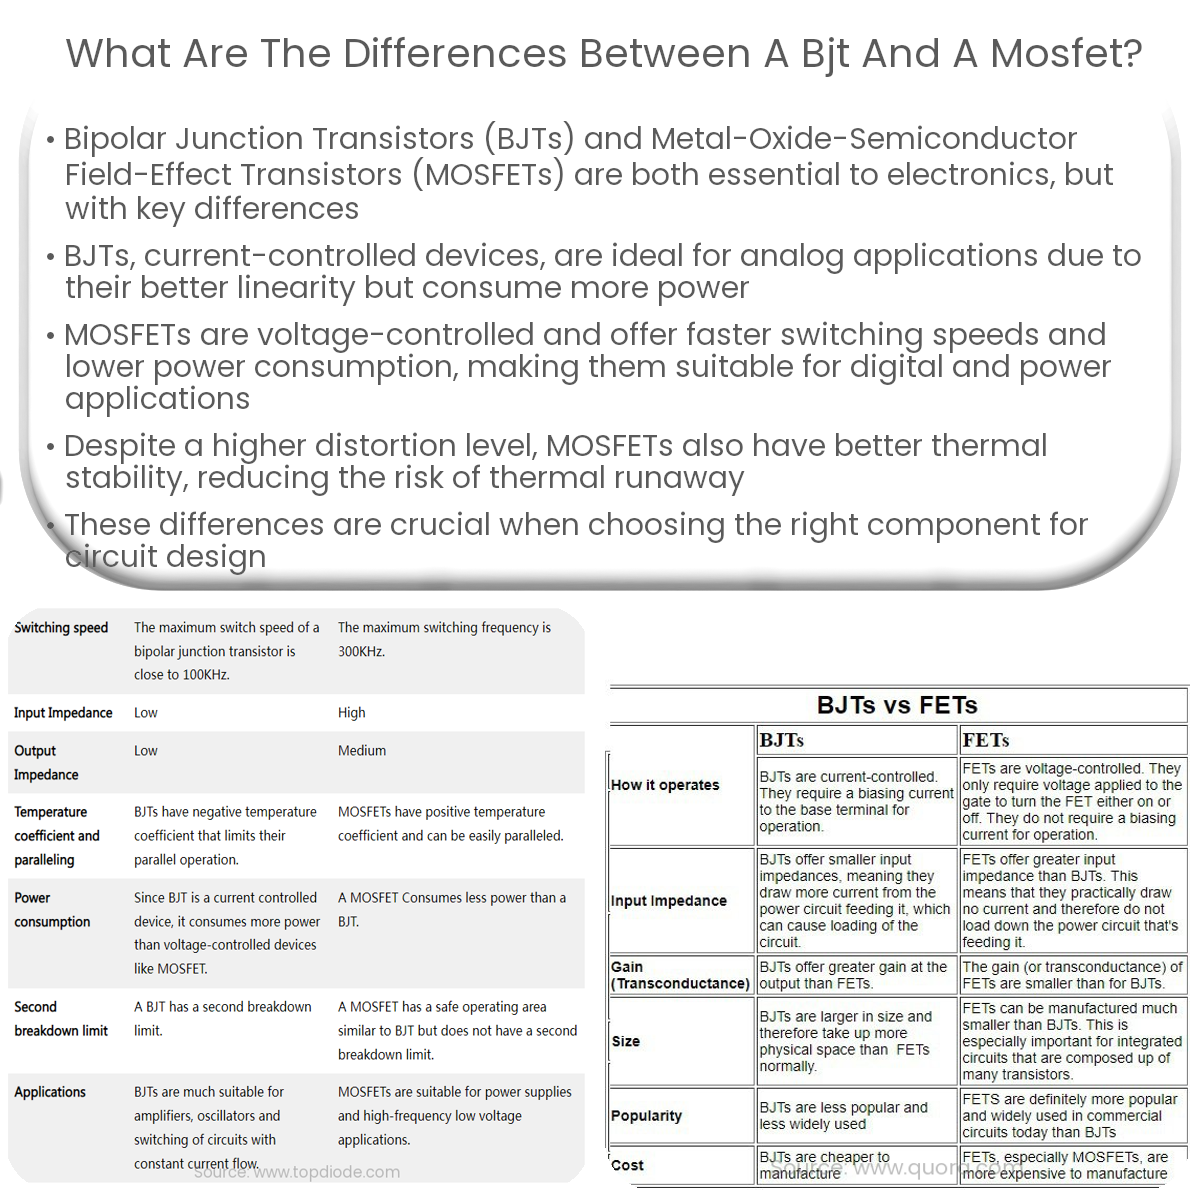 What are the differences between a BJT and a MOSFET?